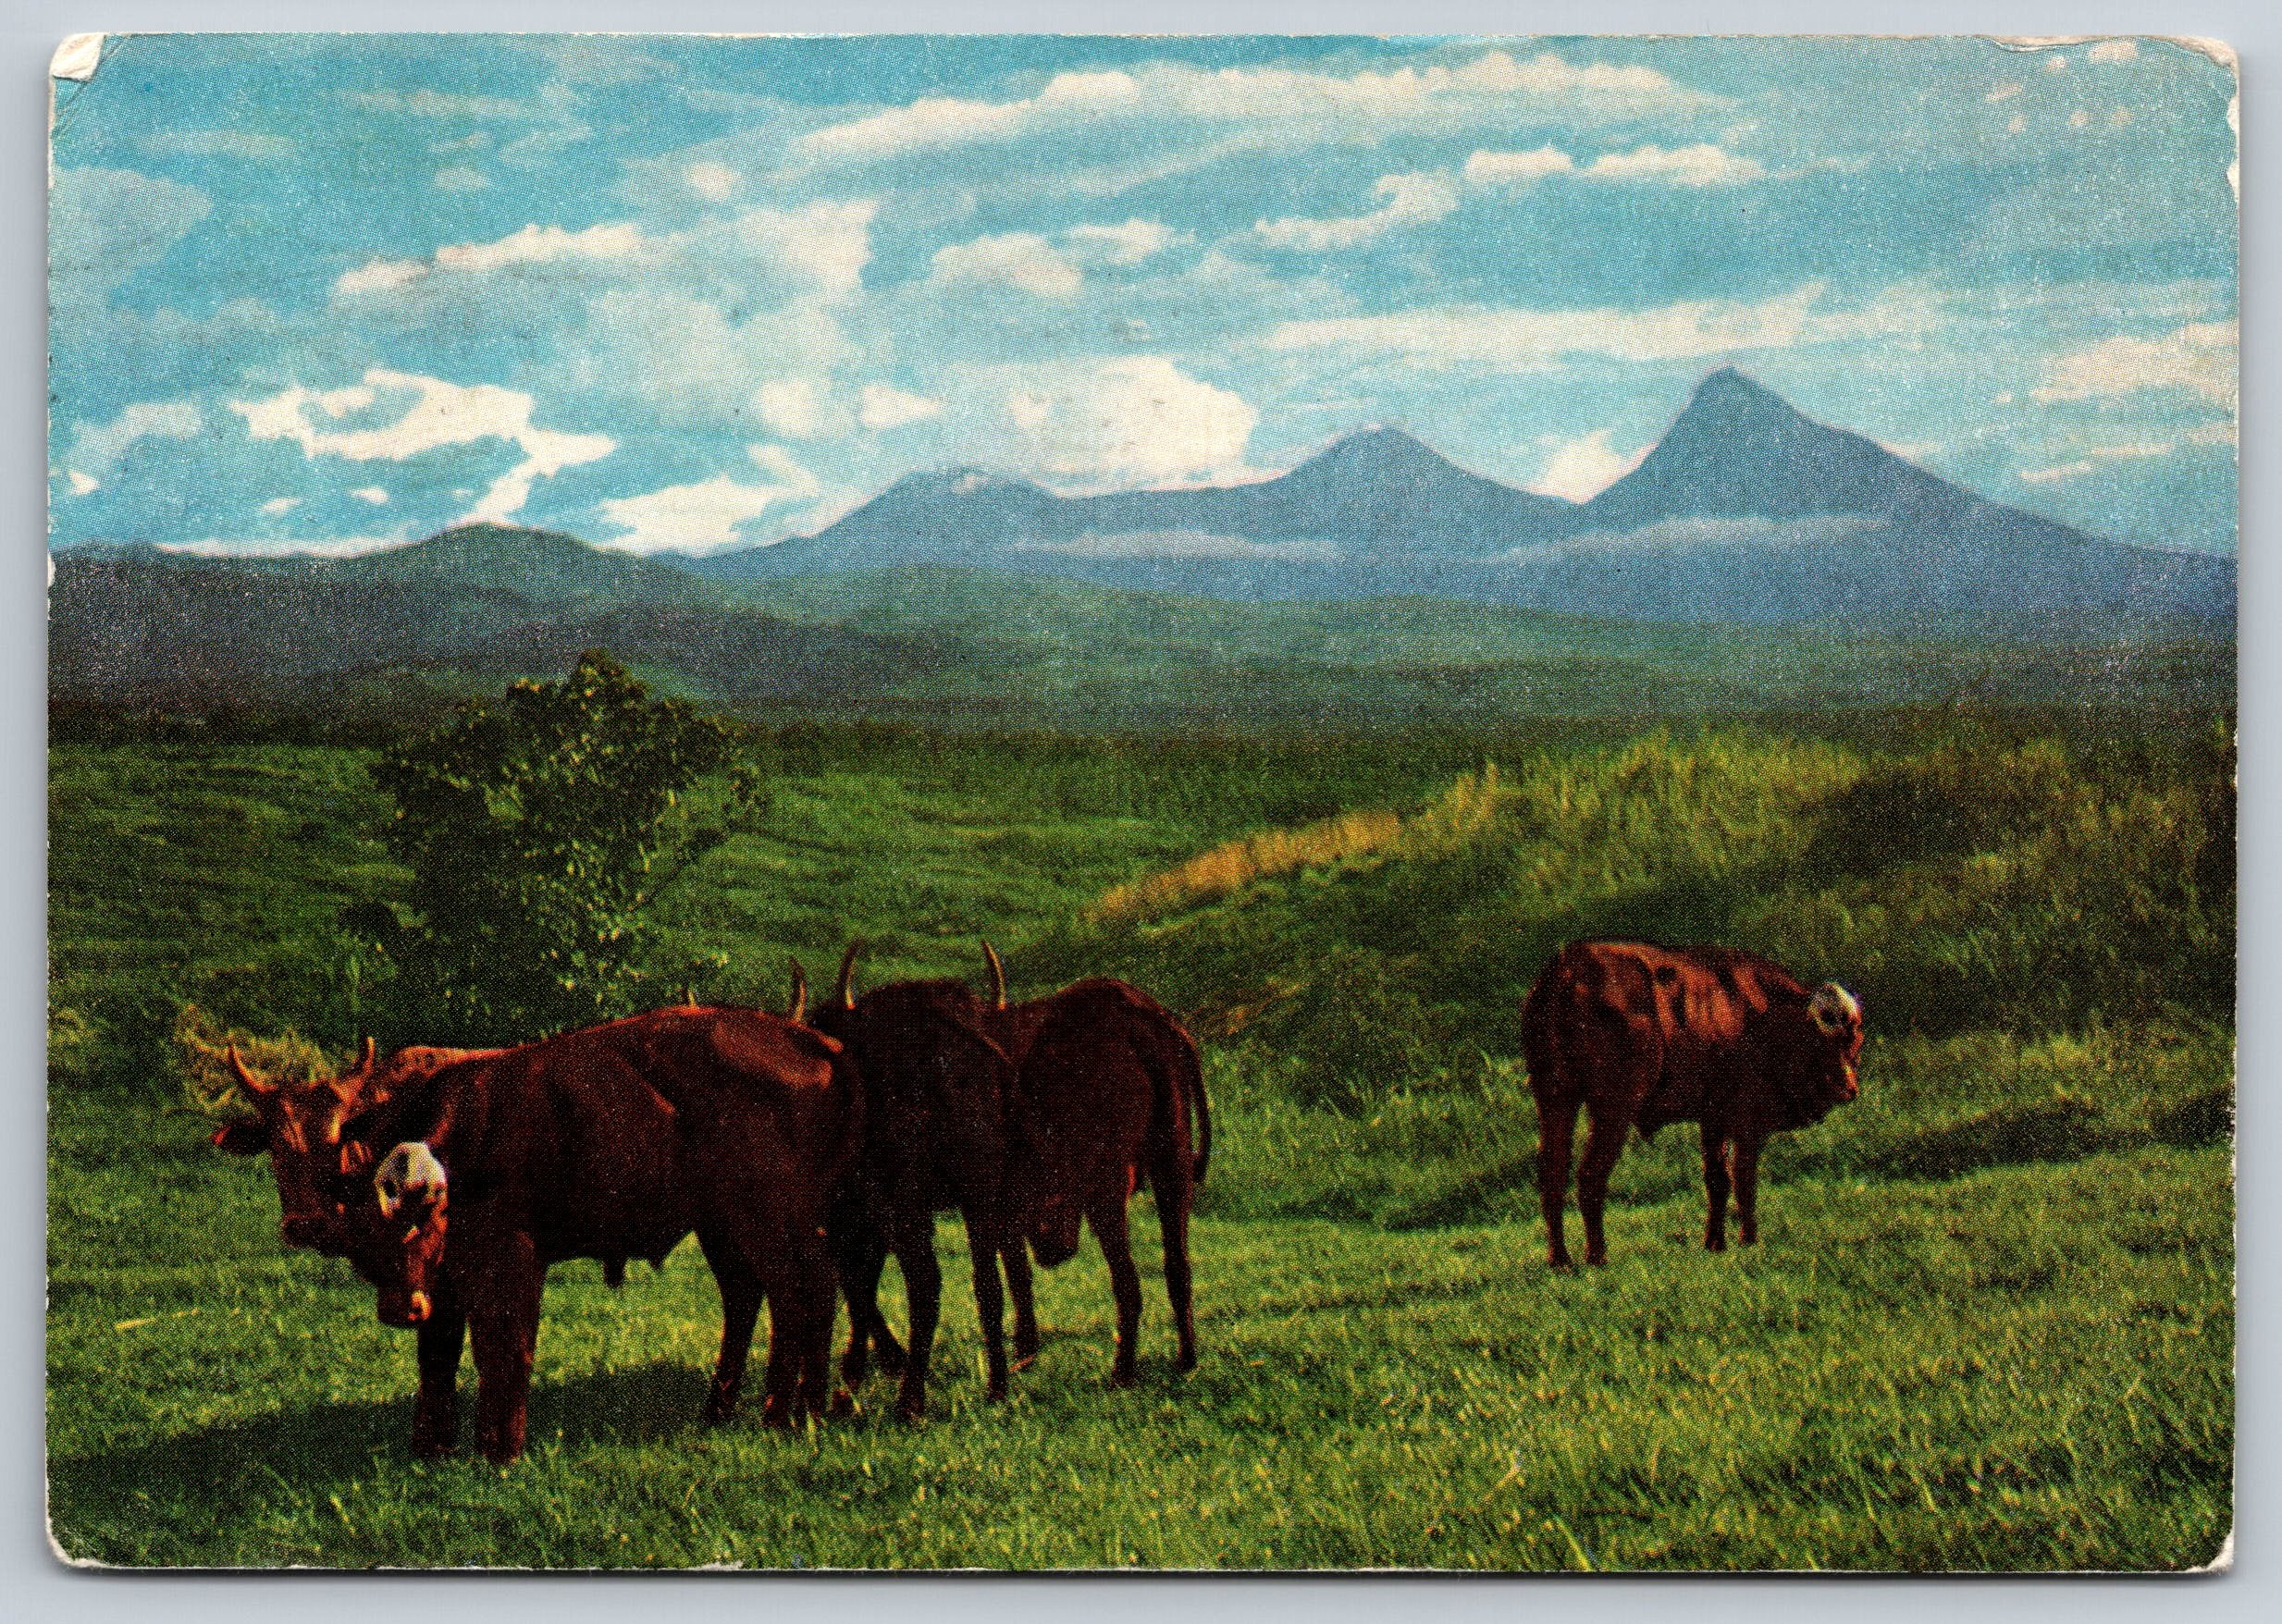 Cows On A Field, Congo Tourism, addressed to Doctors VTG PC